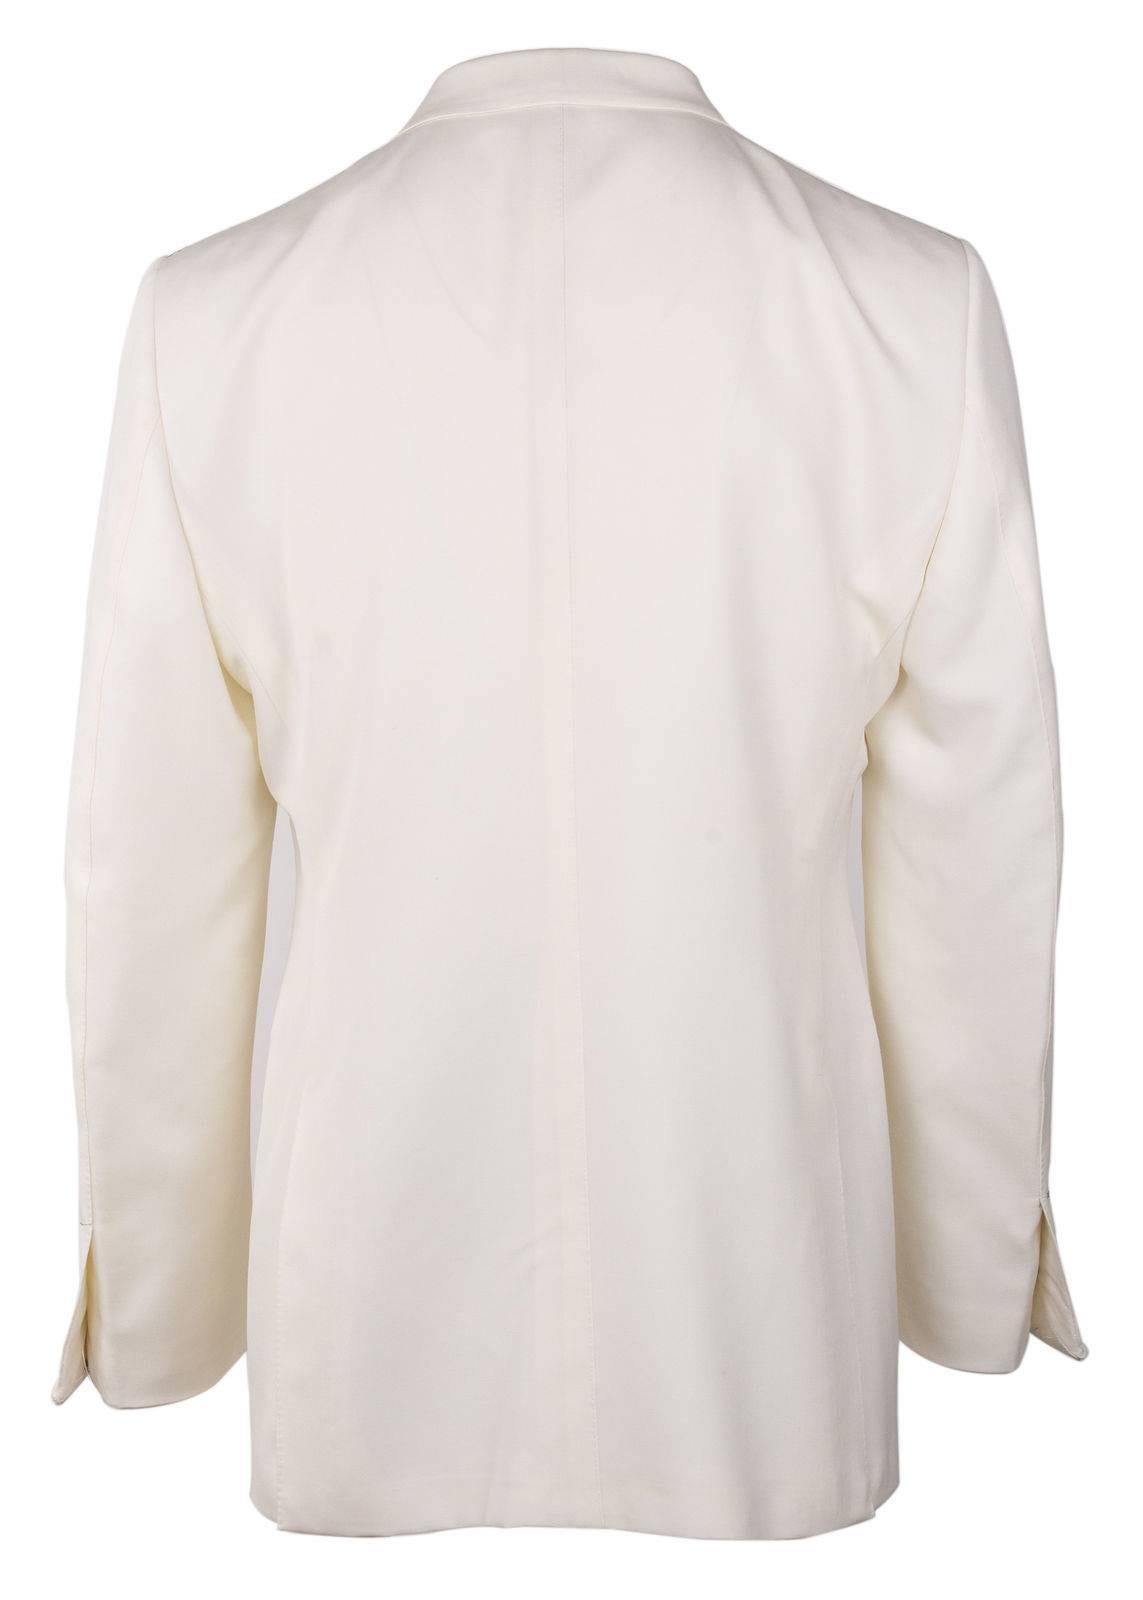 Tom Ford Ivory Wool Blend Peak Lapel OConnor Cocktail Jacket In Excellent Condition For Sale In Brooklyn, NY